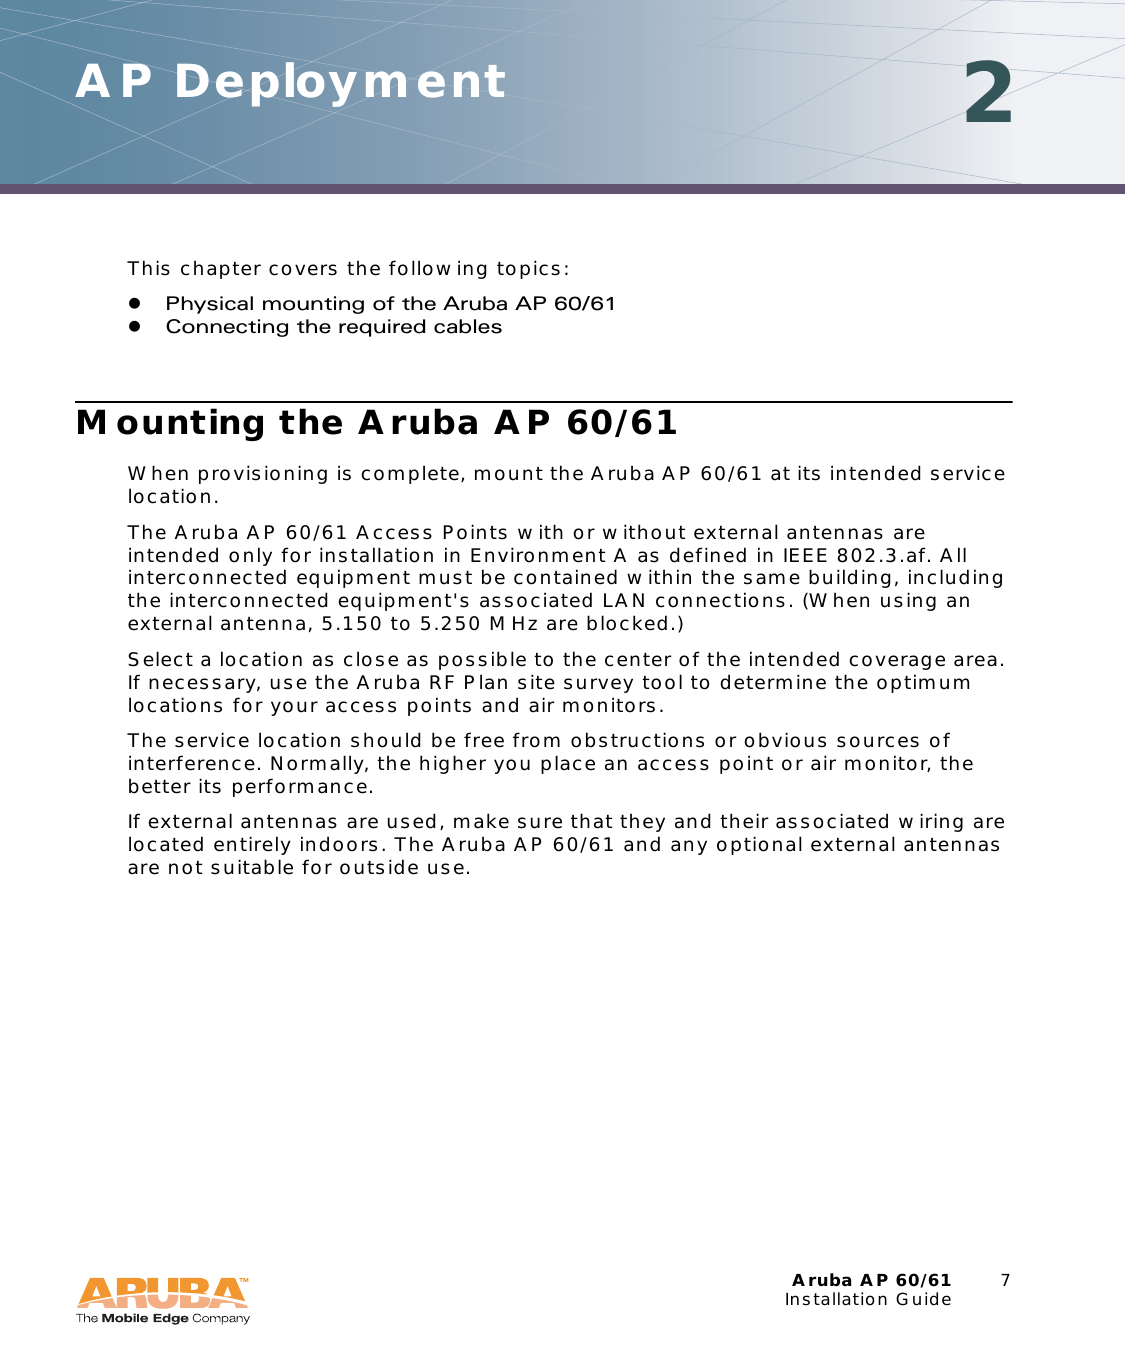 Aruba AP 60/61 7Installation GuideAP Deployment 2This chapter covers the following topics:zPhysical mounting of the Aruba AP 60/61zConnecting the required cablesMounting the Aruba AP 60/61When provisioning is complete, mount the Aruba AP 60/61 at its intended service location.The Aruba AP 60/61 Access Points with or without external antennas are intended only for installation in Environment A as defined in IEEE 802.3.af. All interconnected equipment must be contained within the same building, including the interconnected equipment&apos;s associated LAN connections. (When using an external antenna, 5.150 to 5.250 MHz are blocked.)Select a location as close as possible to the center of the intended coverage area. If necessary, use the Aruba RF Plan site survey tool to determine the optimum locations for your access points and air monitors.The service location should be free from obstructions or obvious sources of interference. Normally, the higher you place an access point or air monitor, the better its performance.If external antennas are used, make sure that they and their associated wiring are located entirely indoors. The Aruba AP 60/61 and any optional external antennas are not suitable for outside use.